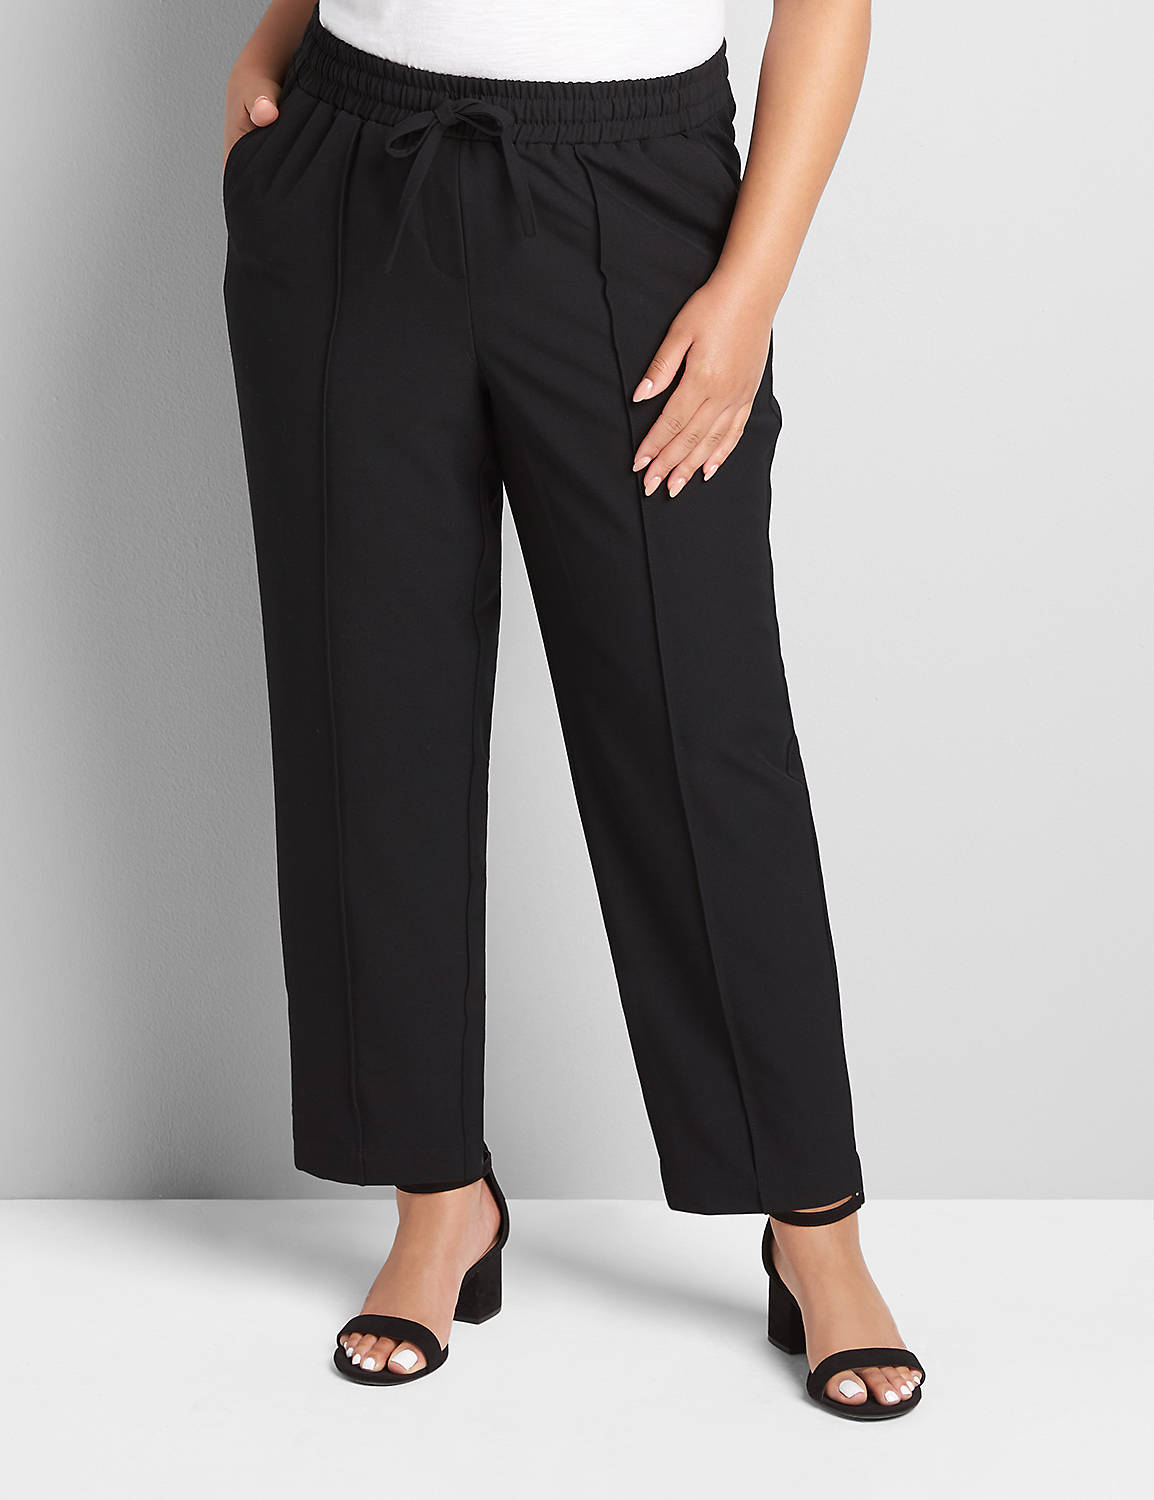 Pull-on Ankle Pant 1120266 Product Image 1